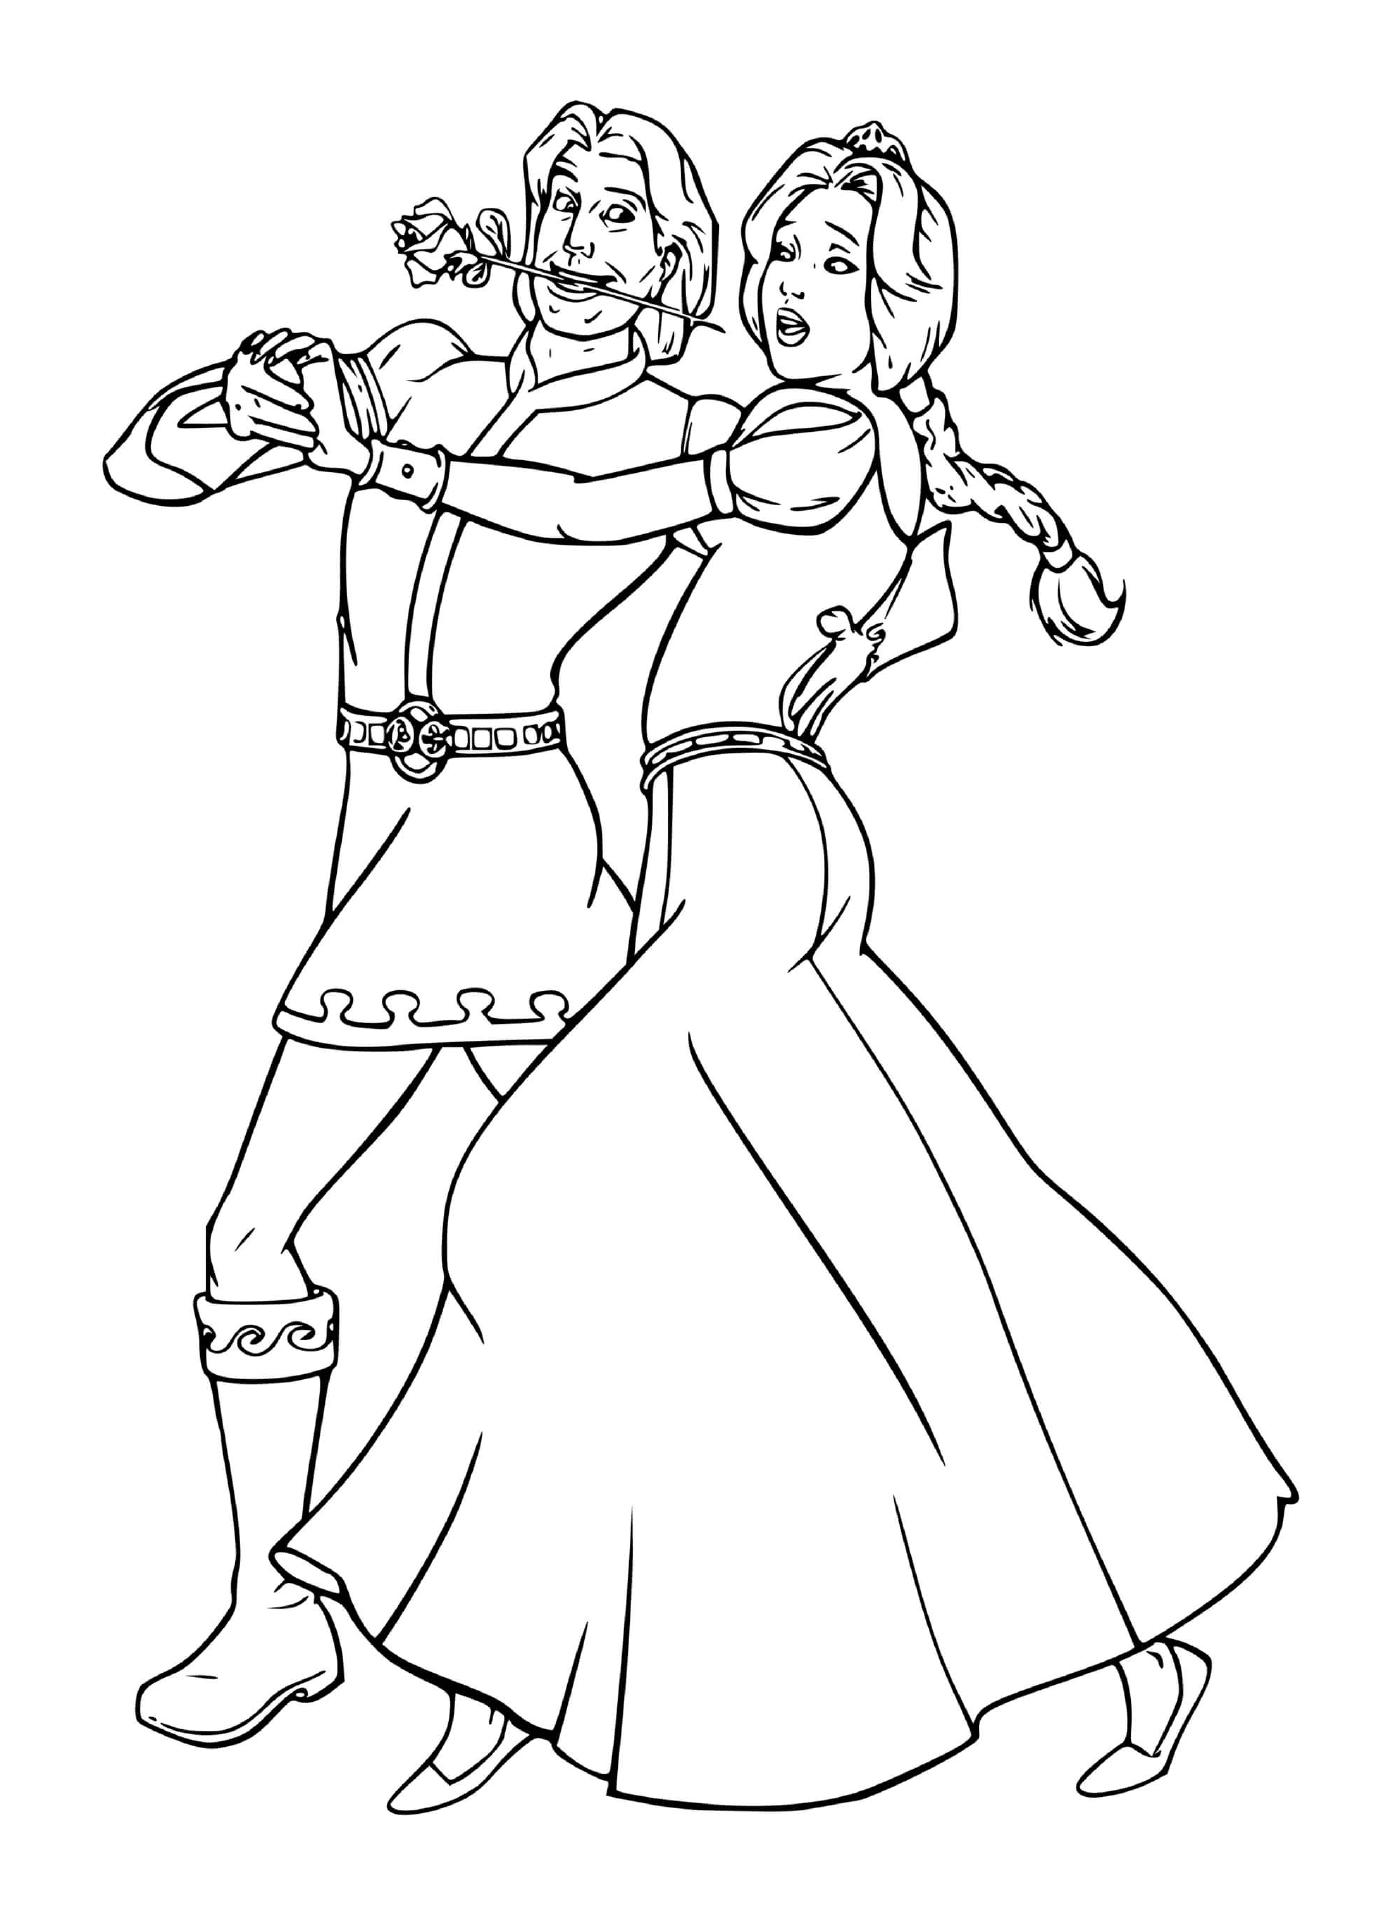  A couple dancing 